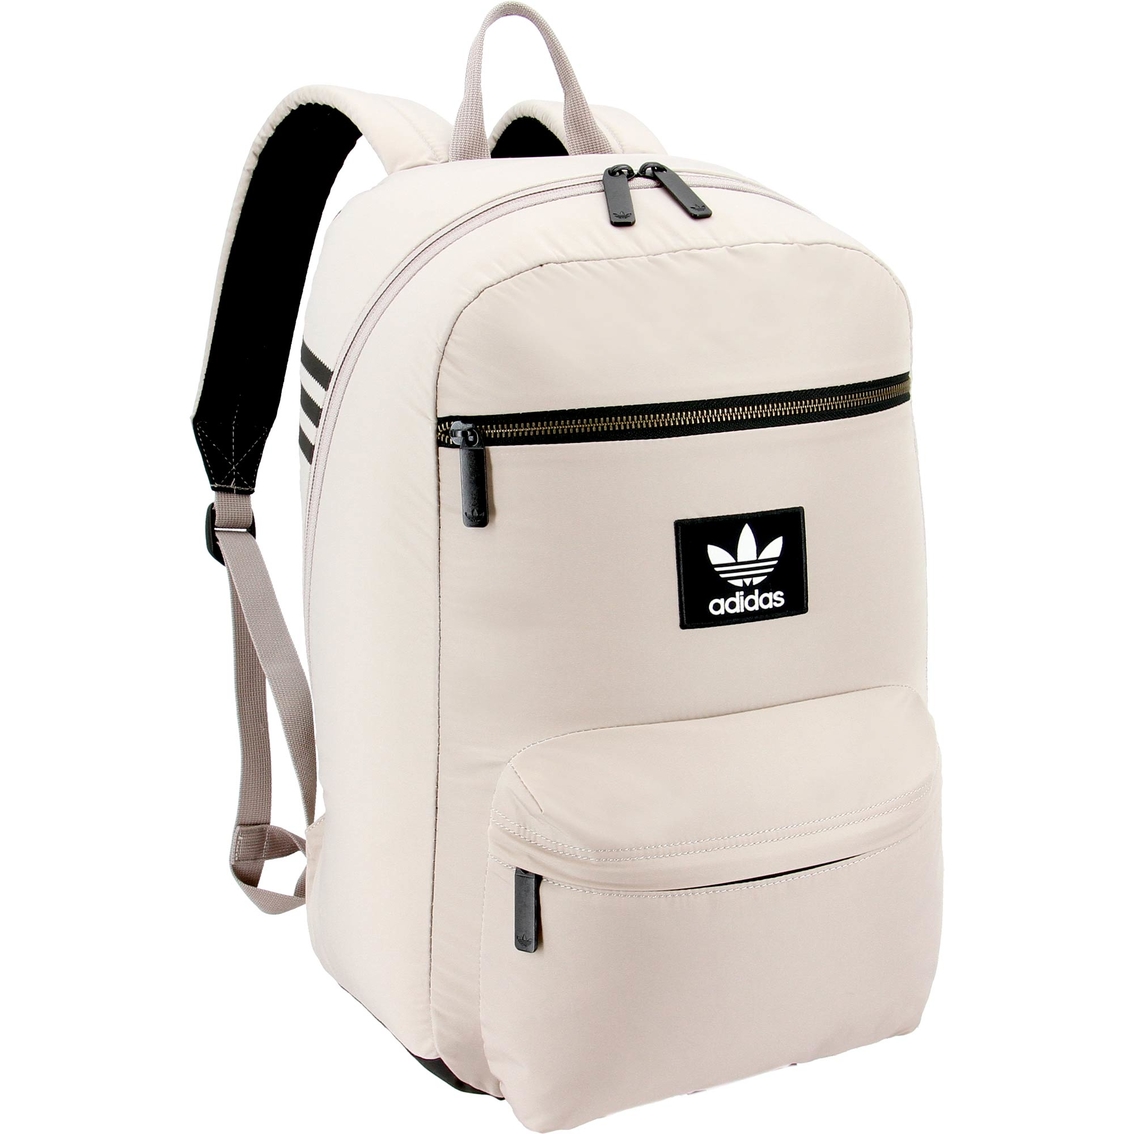 adidas national plus backpack low prices